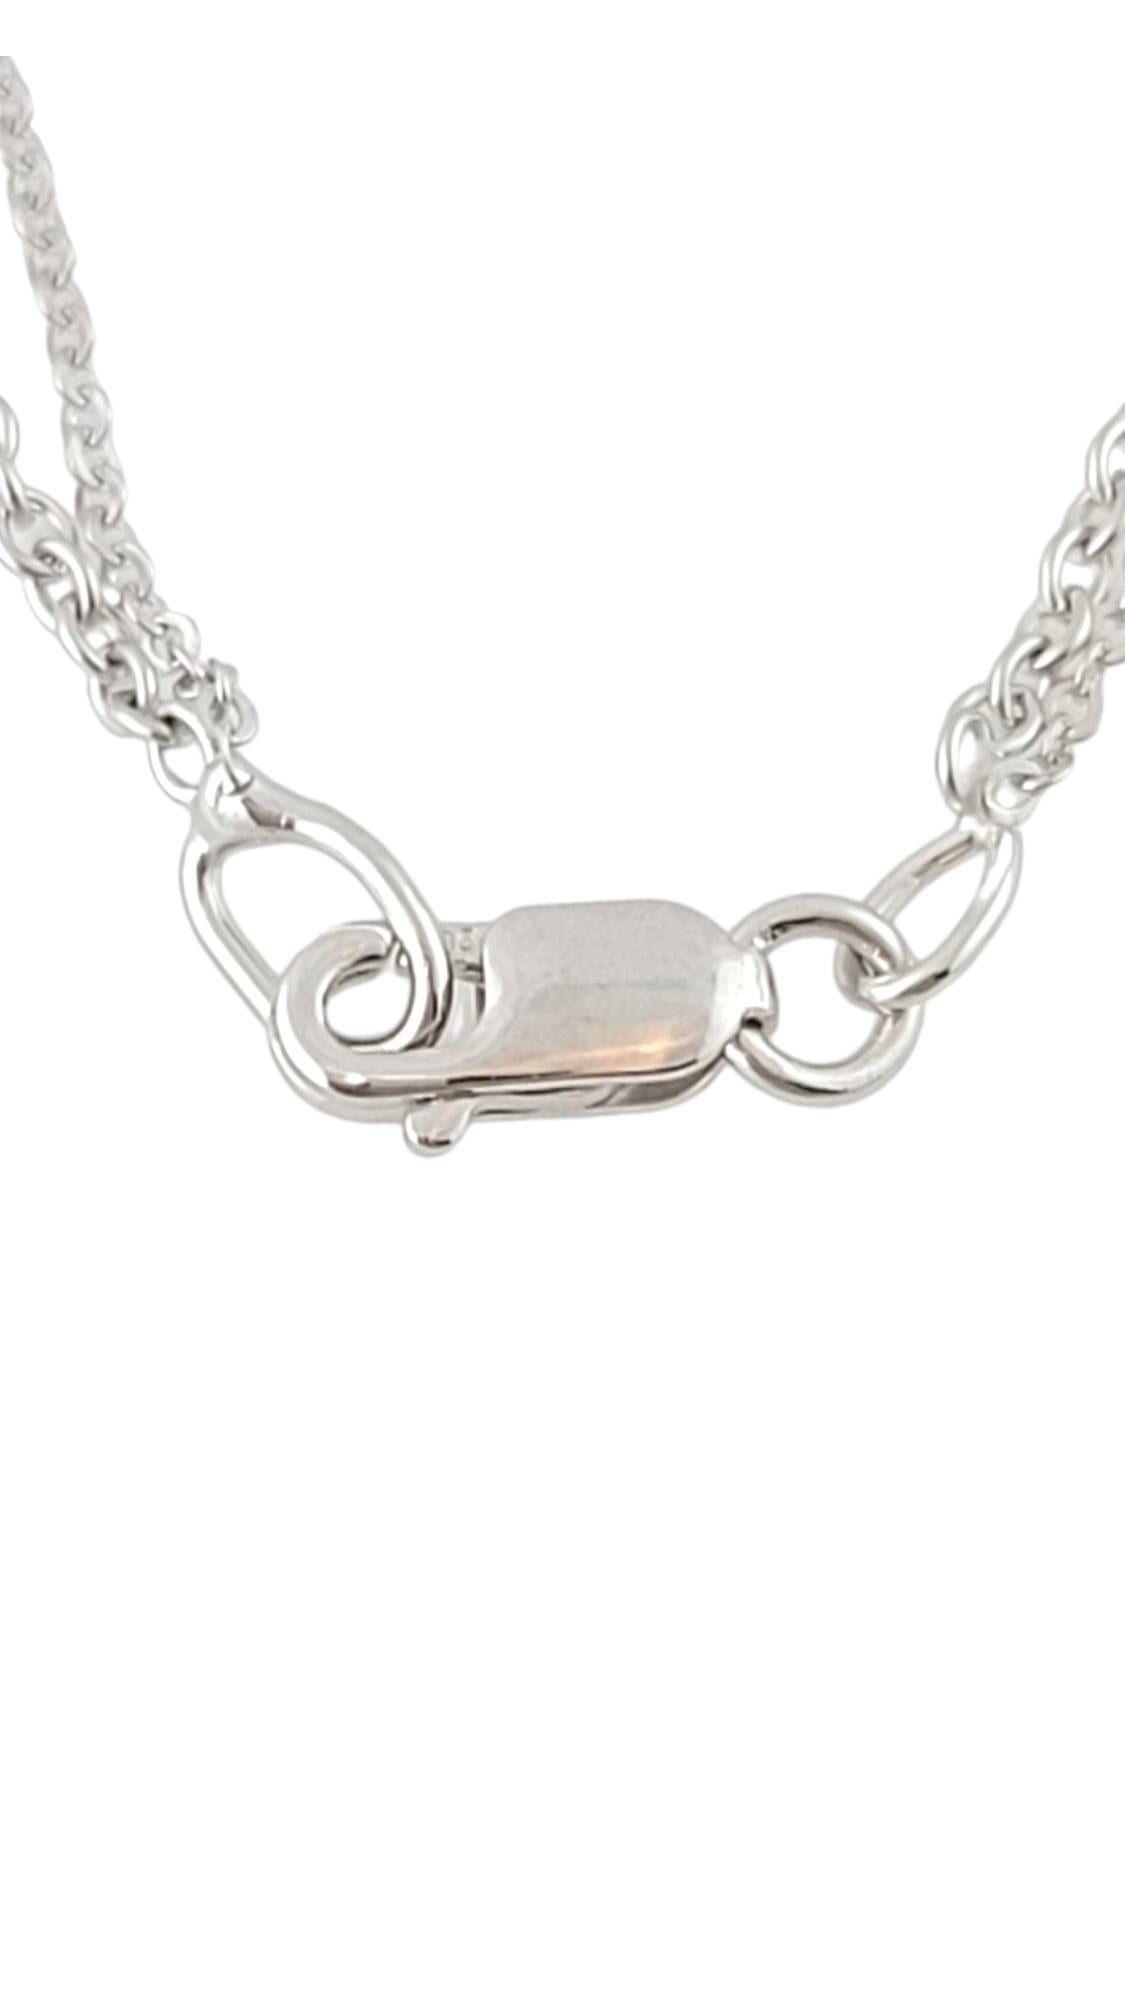 Women's 14K White Gold Two-Strand Chain Necklace #16318 For Sale